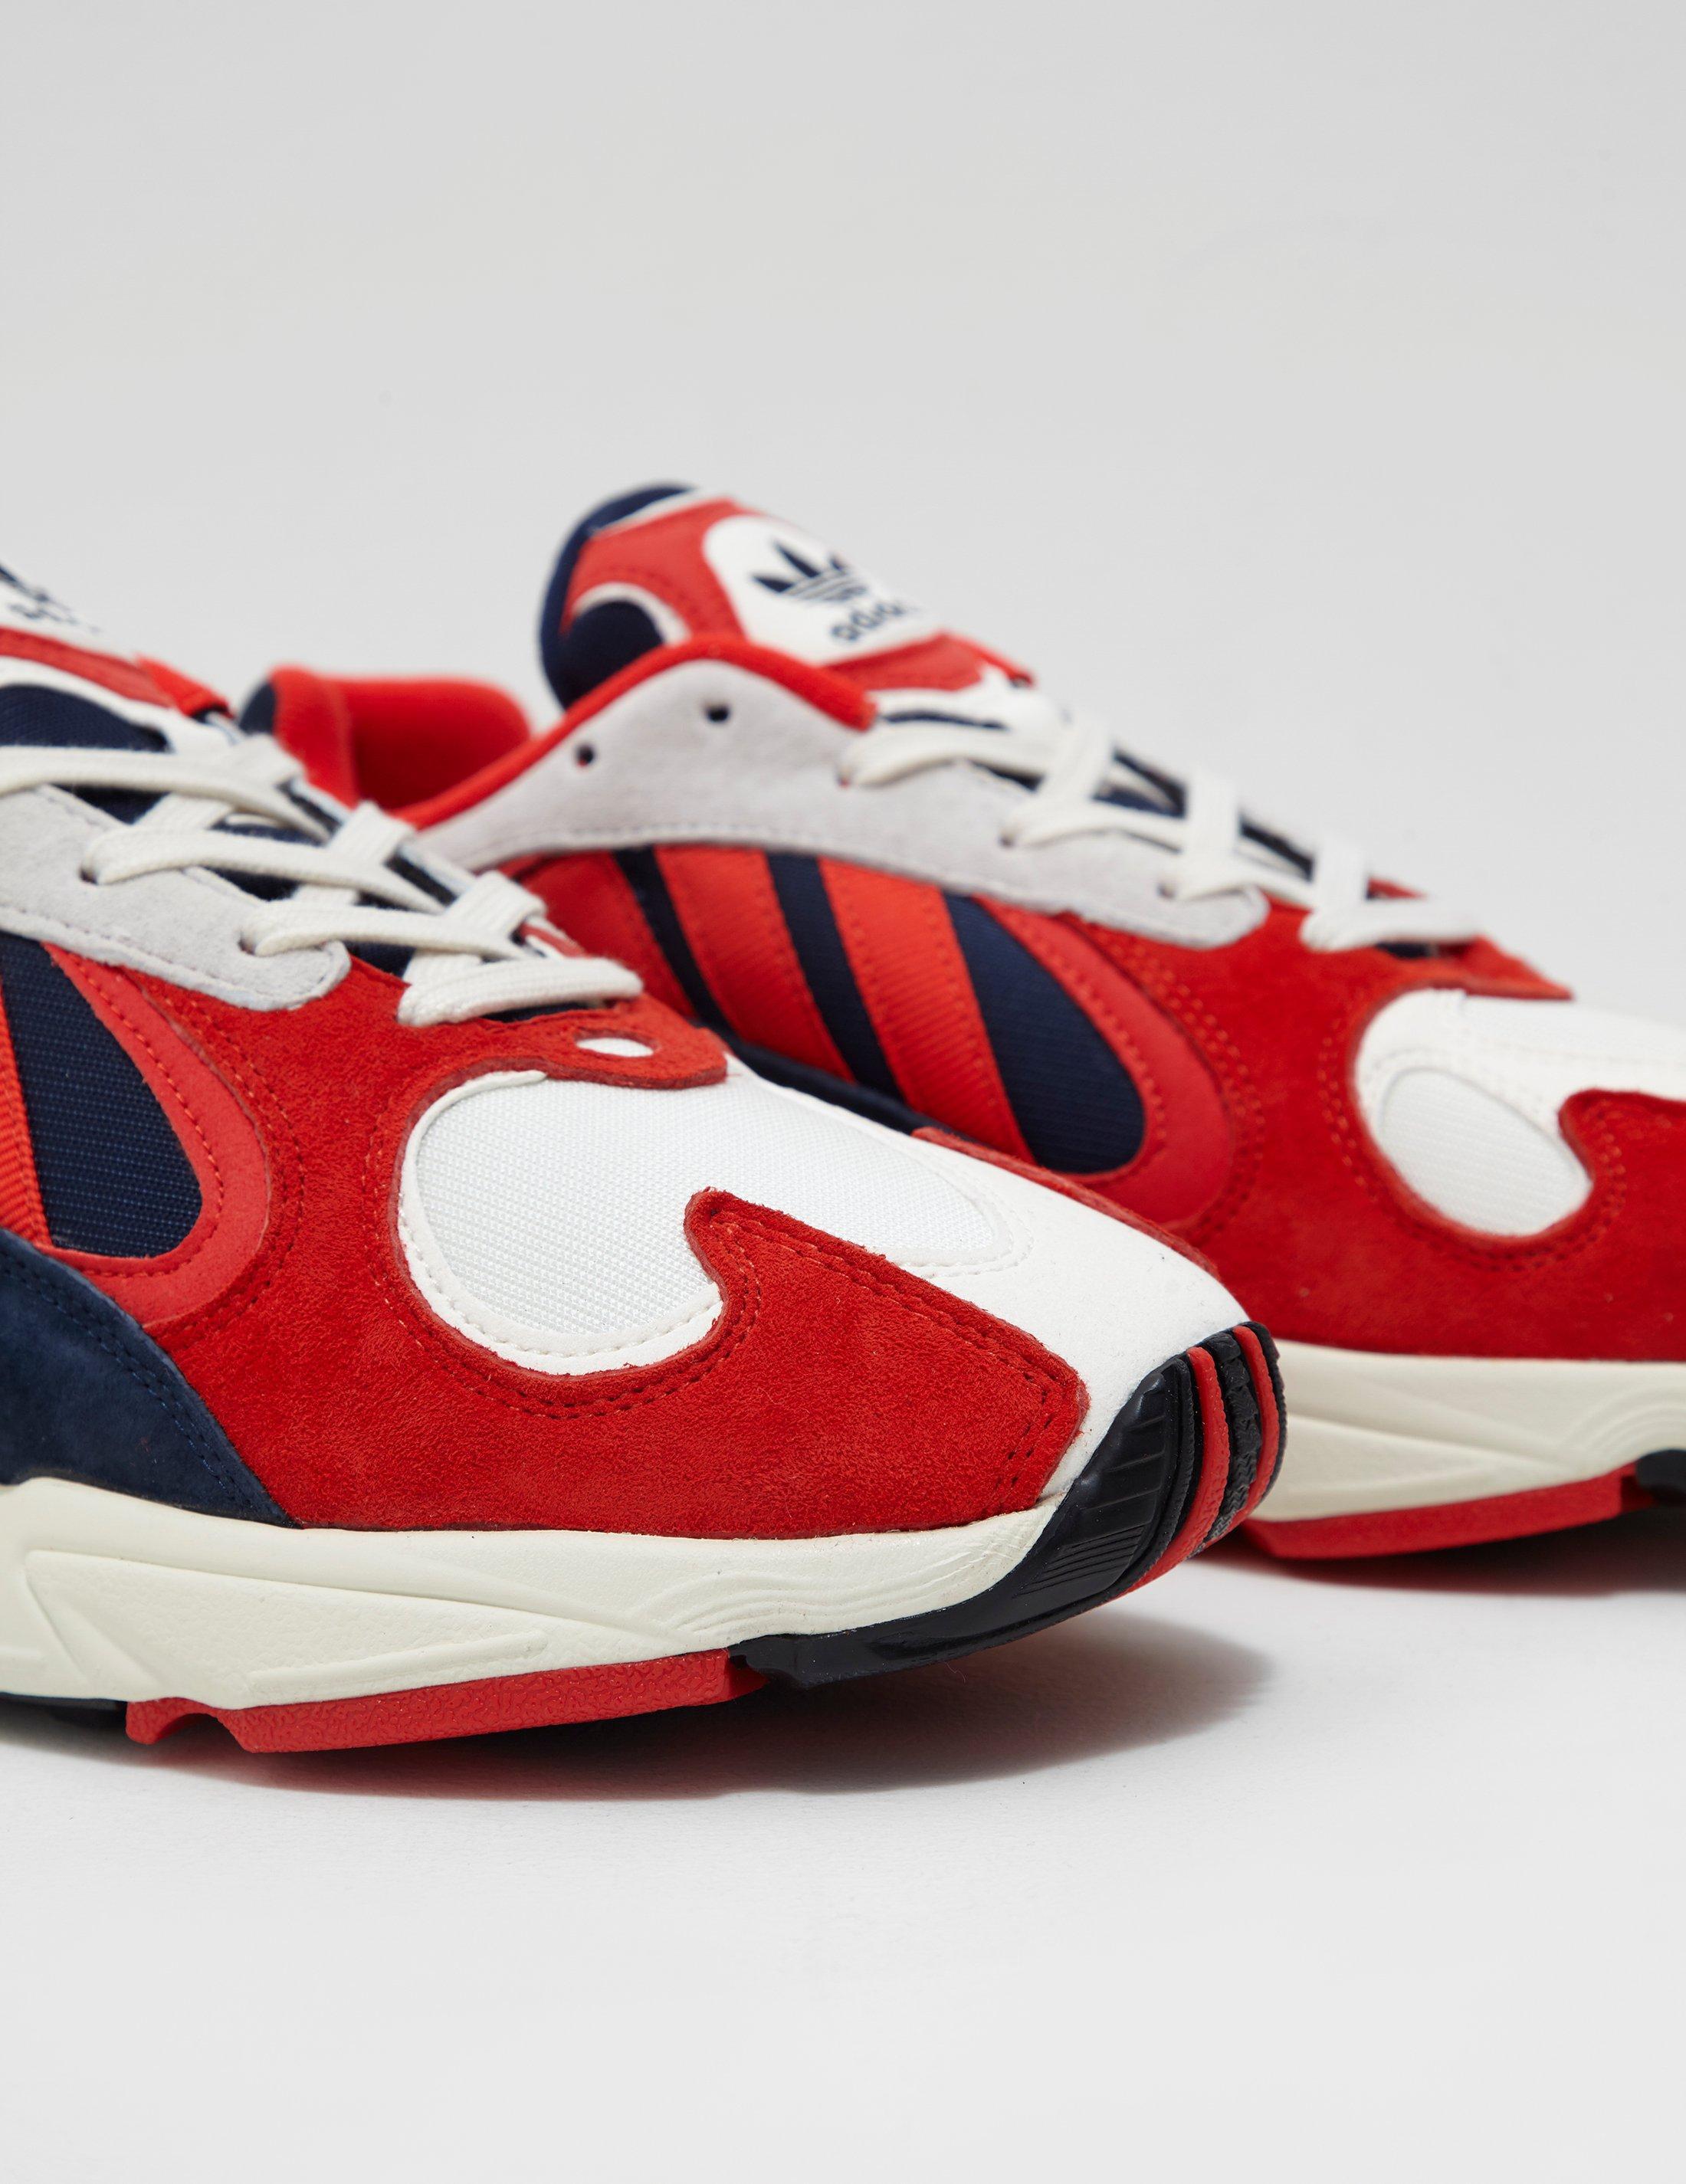 adidas Originals Rubber Mens Yung-1 Multi in Red for Men - Lyst